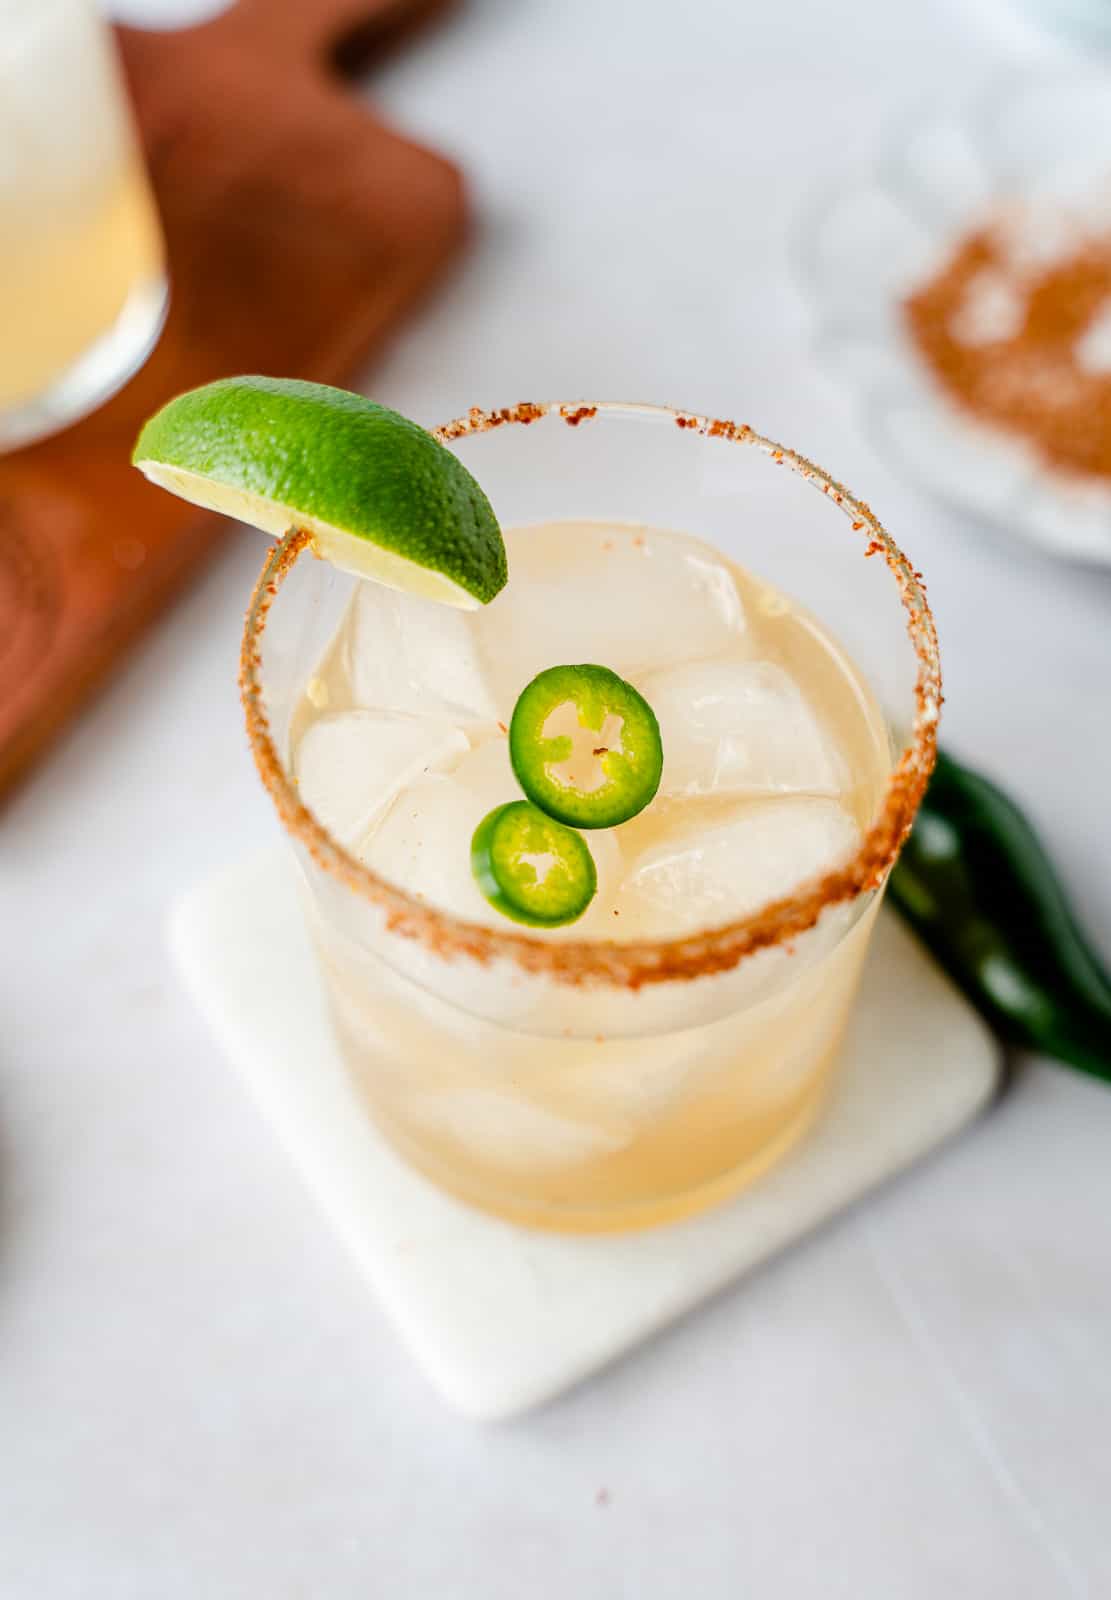 Overhead view of margarita rimmed with chile lime salt.